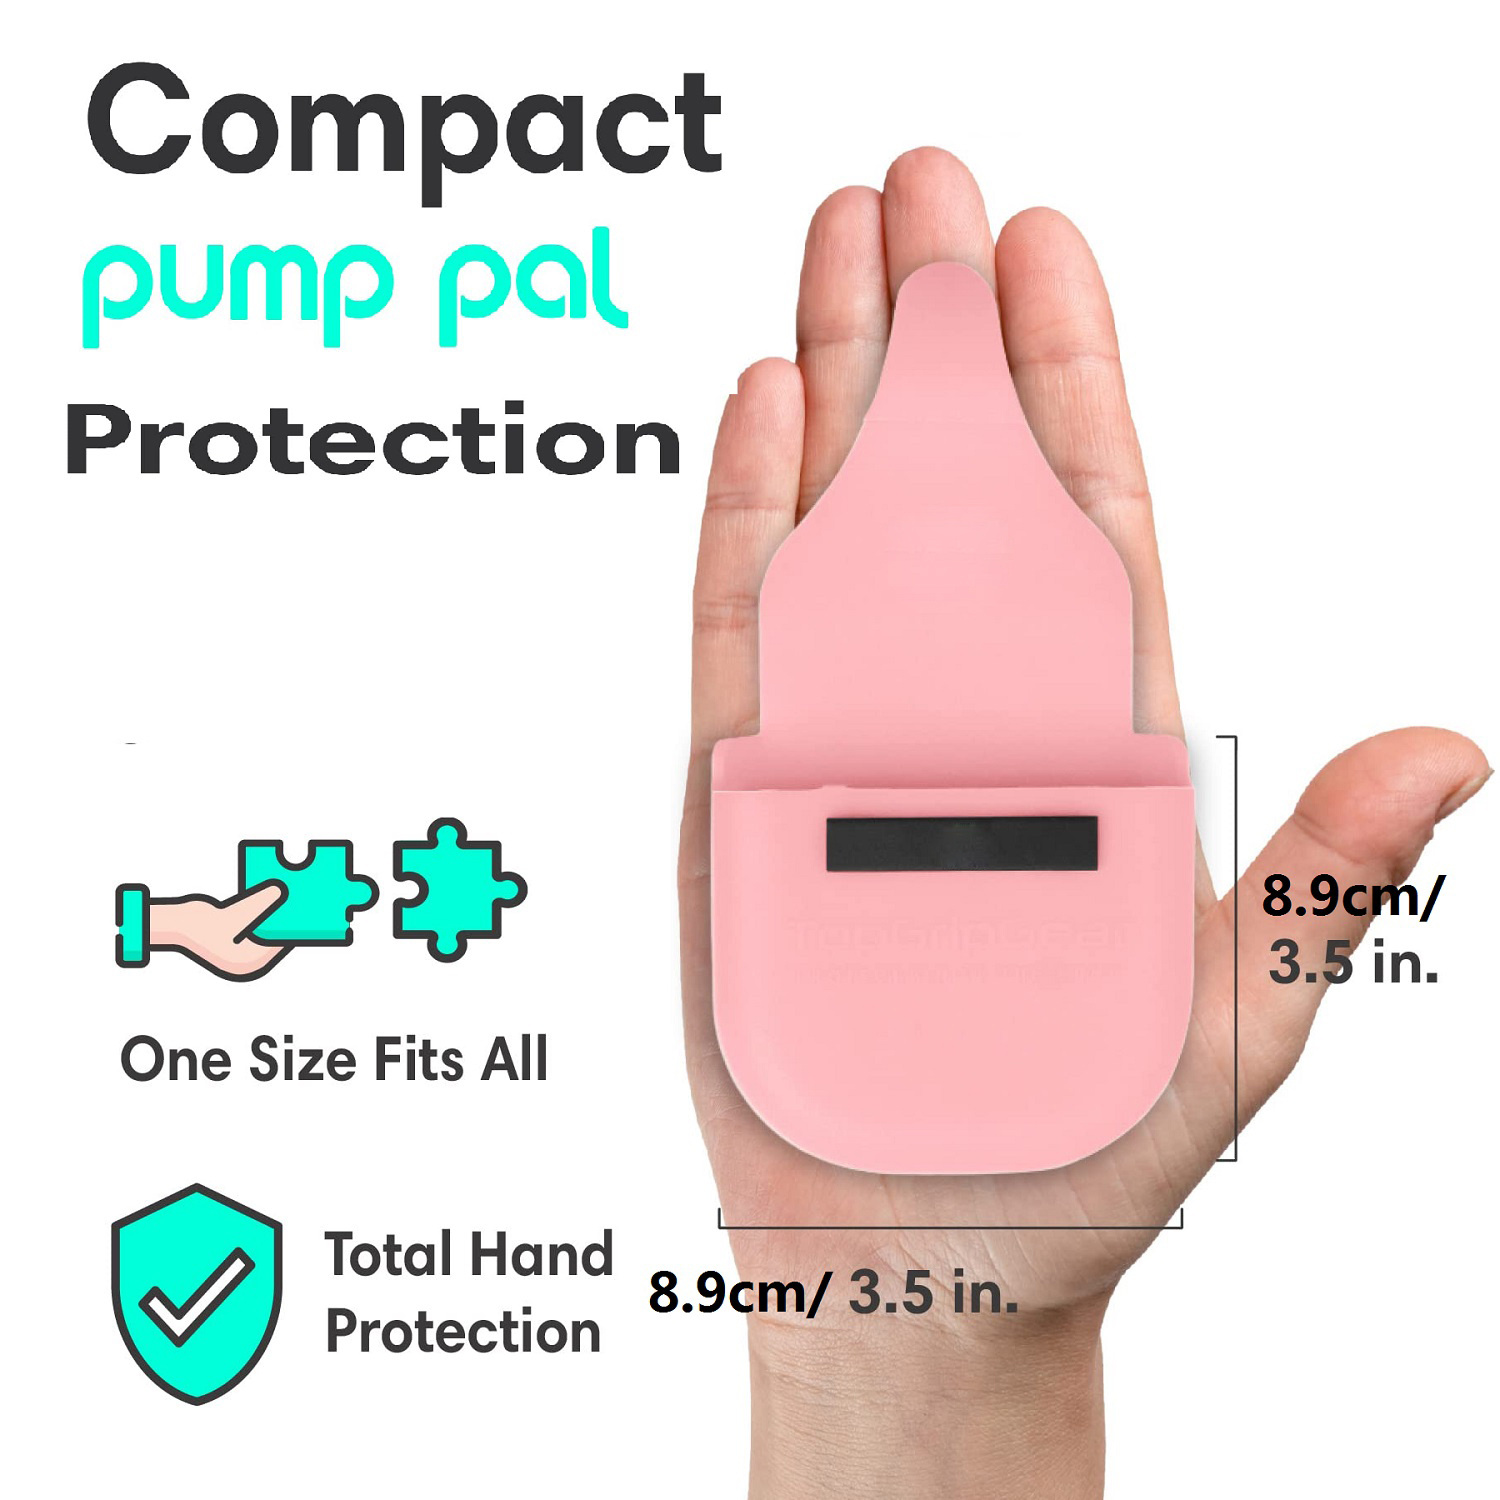 Pump Pal Reusable Fueling Glove, Protect Hands from Filthy Gas Pump  Handles and Keypads